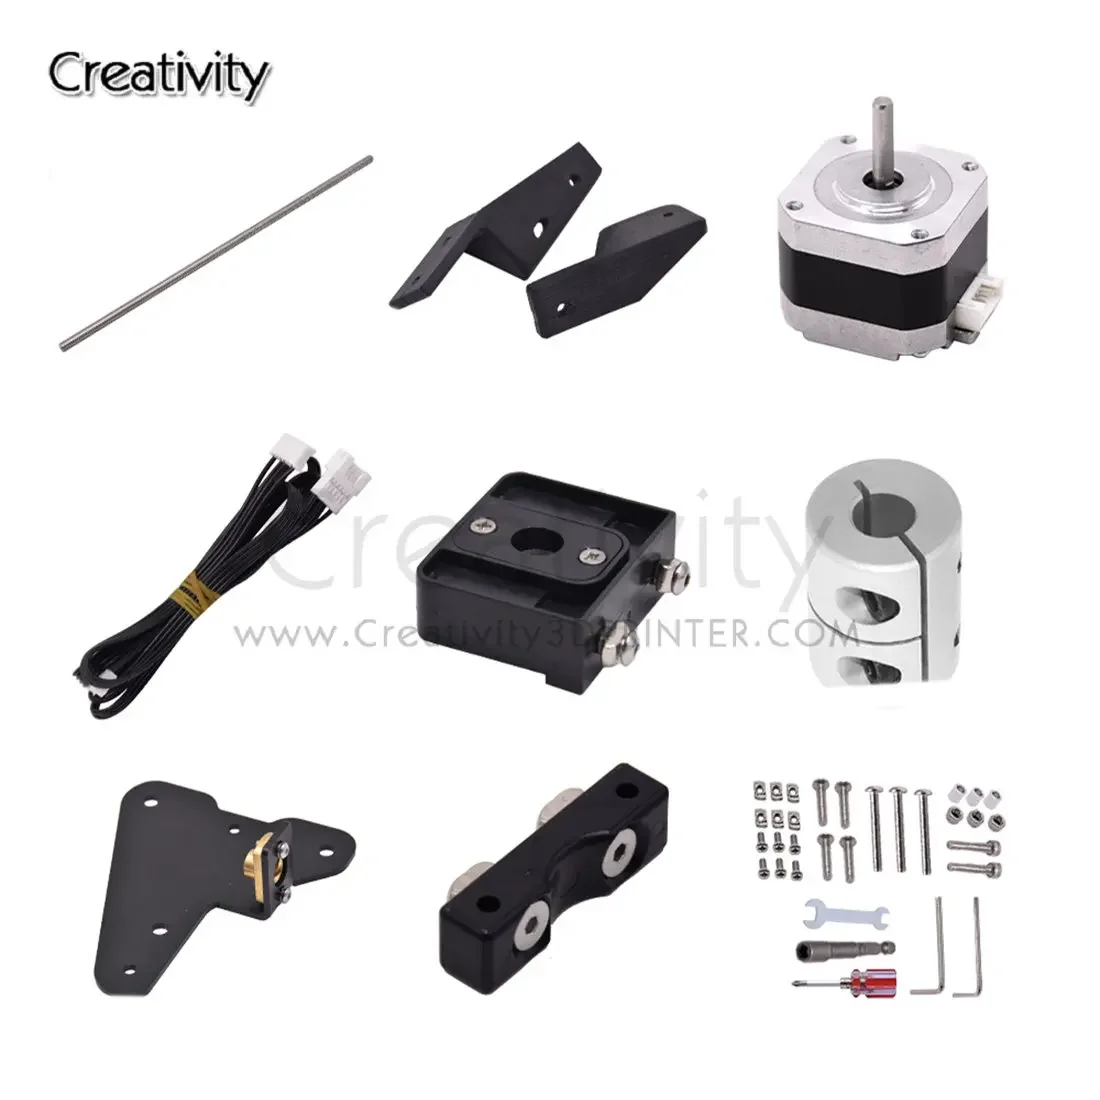 Ender3 Dual Z Axis Upgrade Kit For Ender 3/CR10 With Motor Printer Accessories Lead Screw Kits 3D Print Parts With Belt Pulley